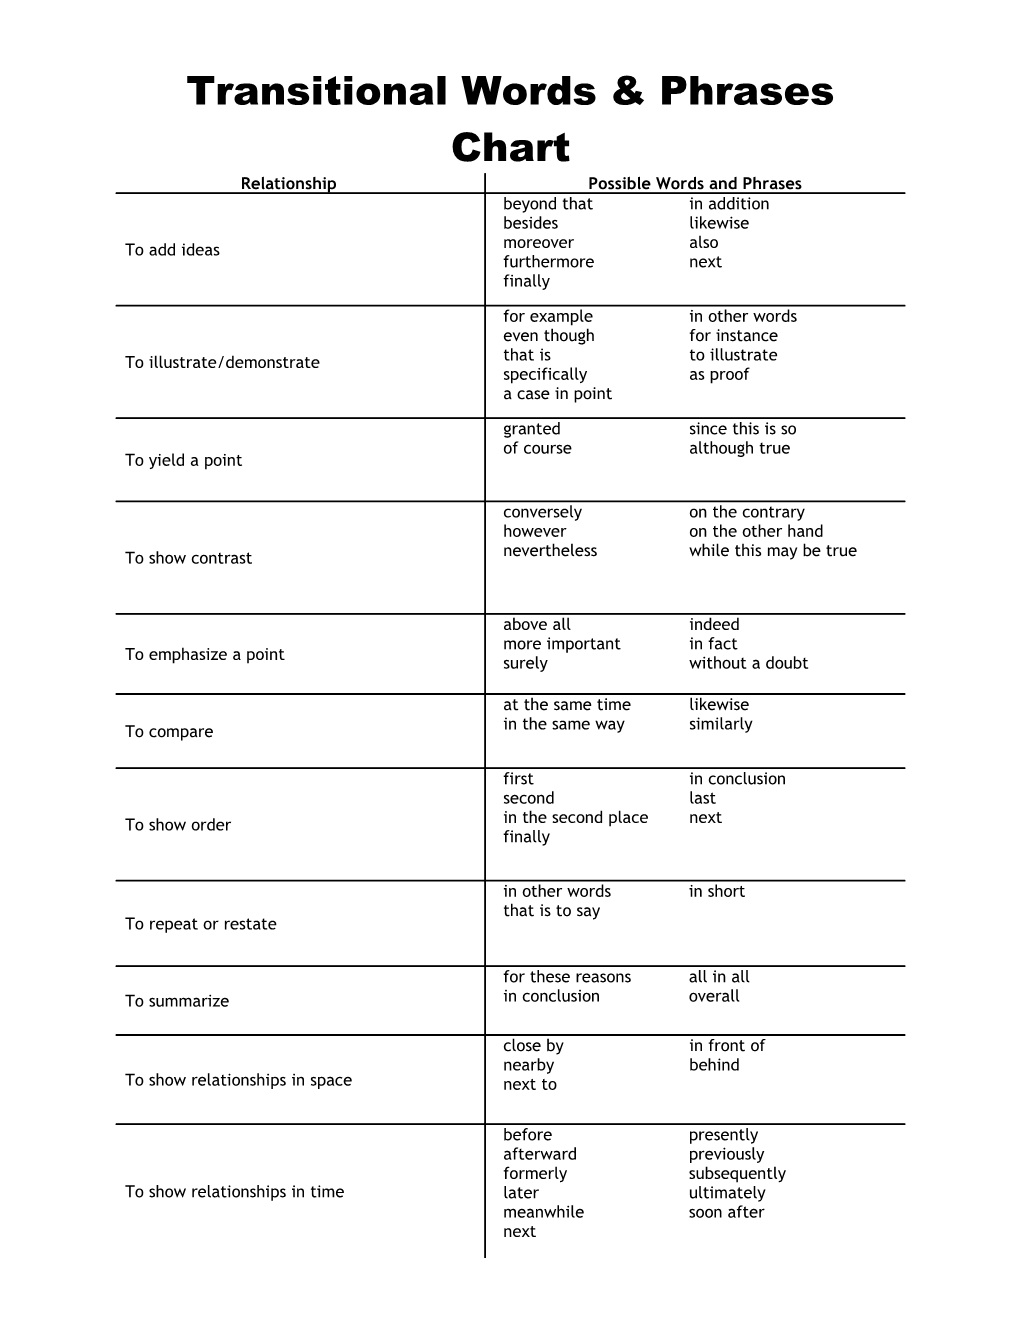 Transitional Words and Phrases Chart